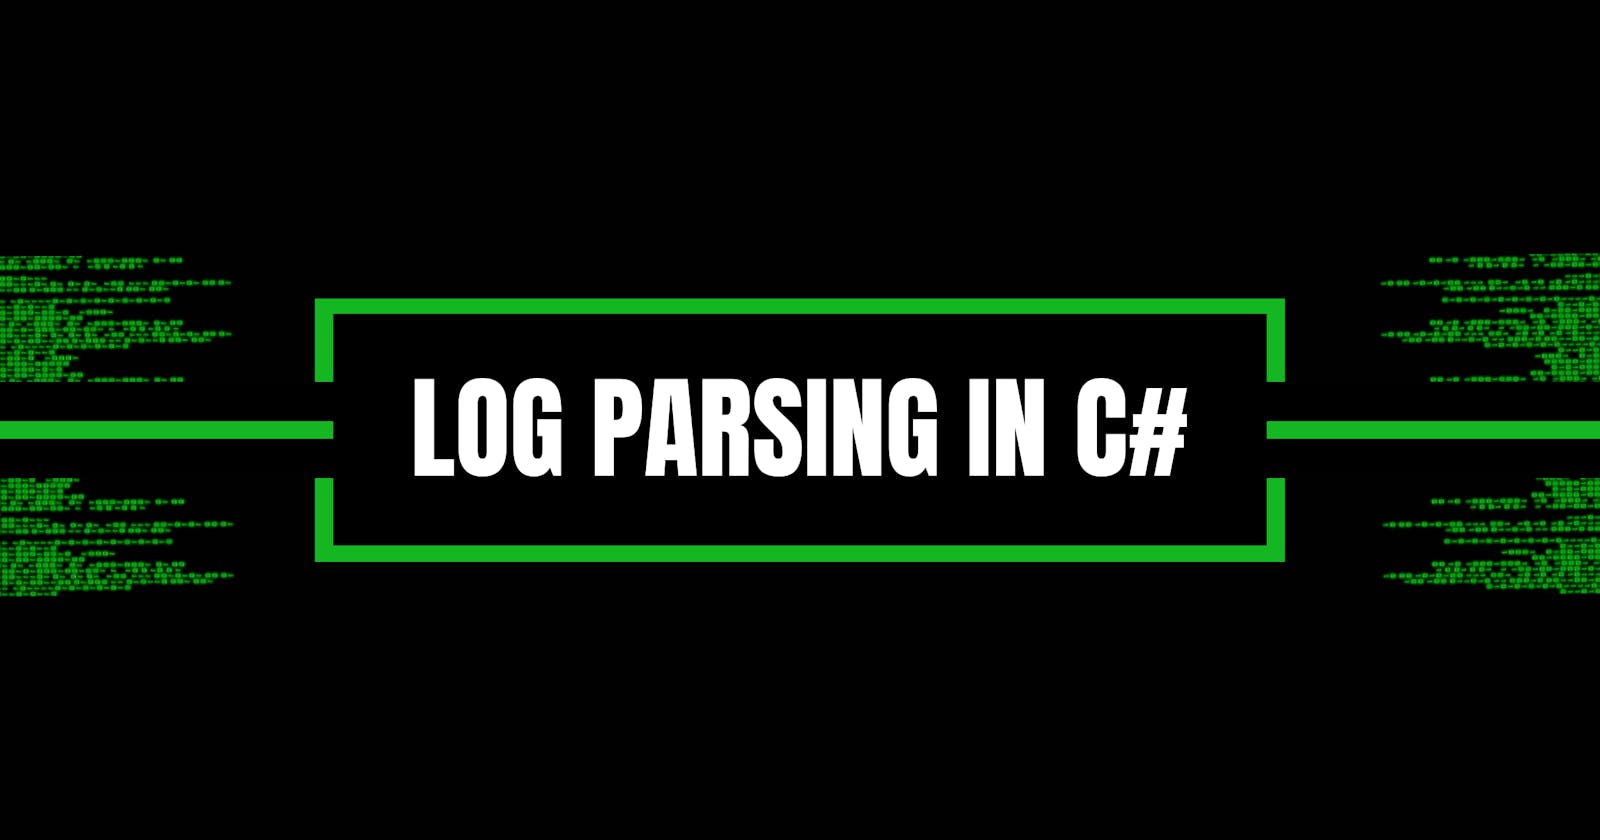 Scanning logs with C#